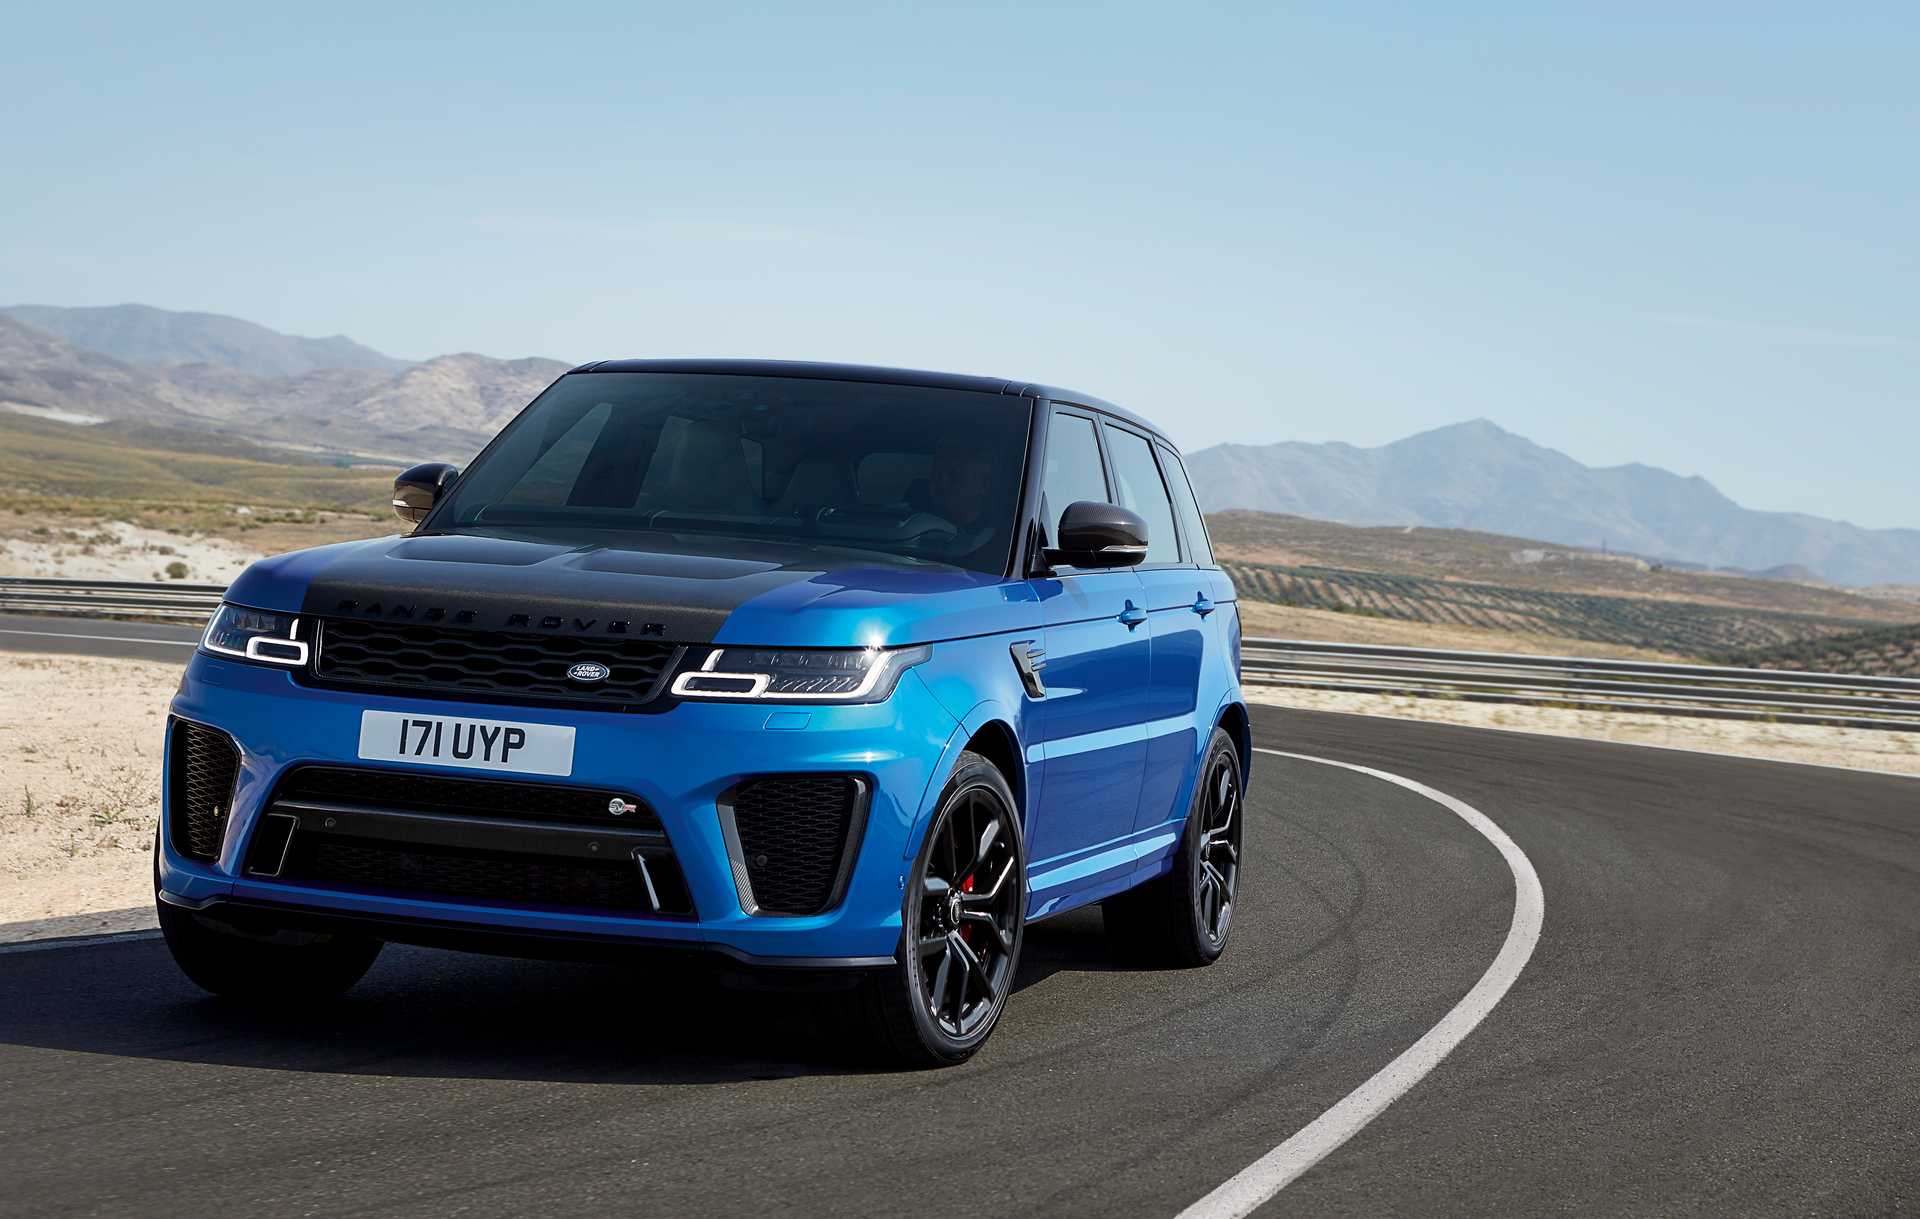 Fichiers Tuning Haute Qualité Land Rover Range Rover / Sport 5.0 V8 Supercharged 575hp